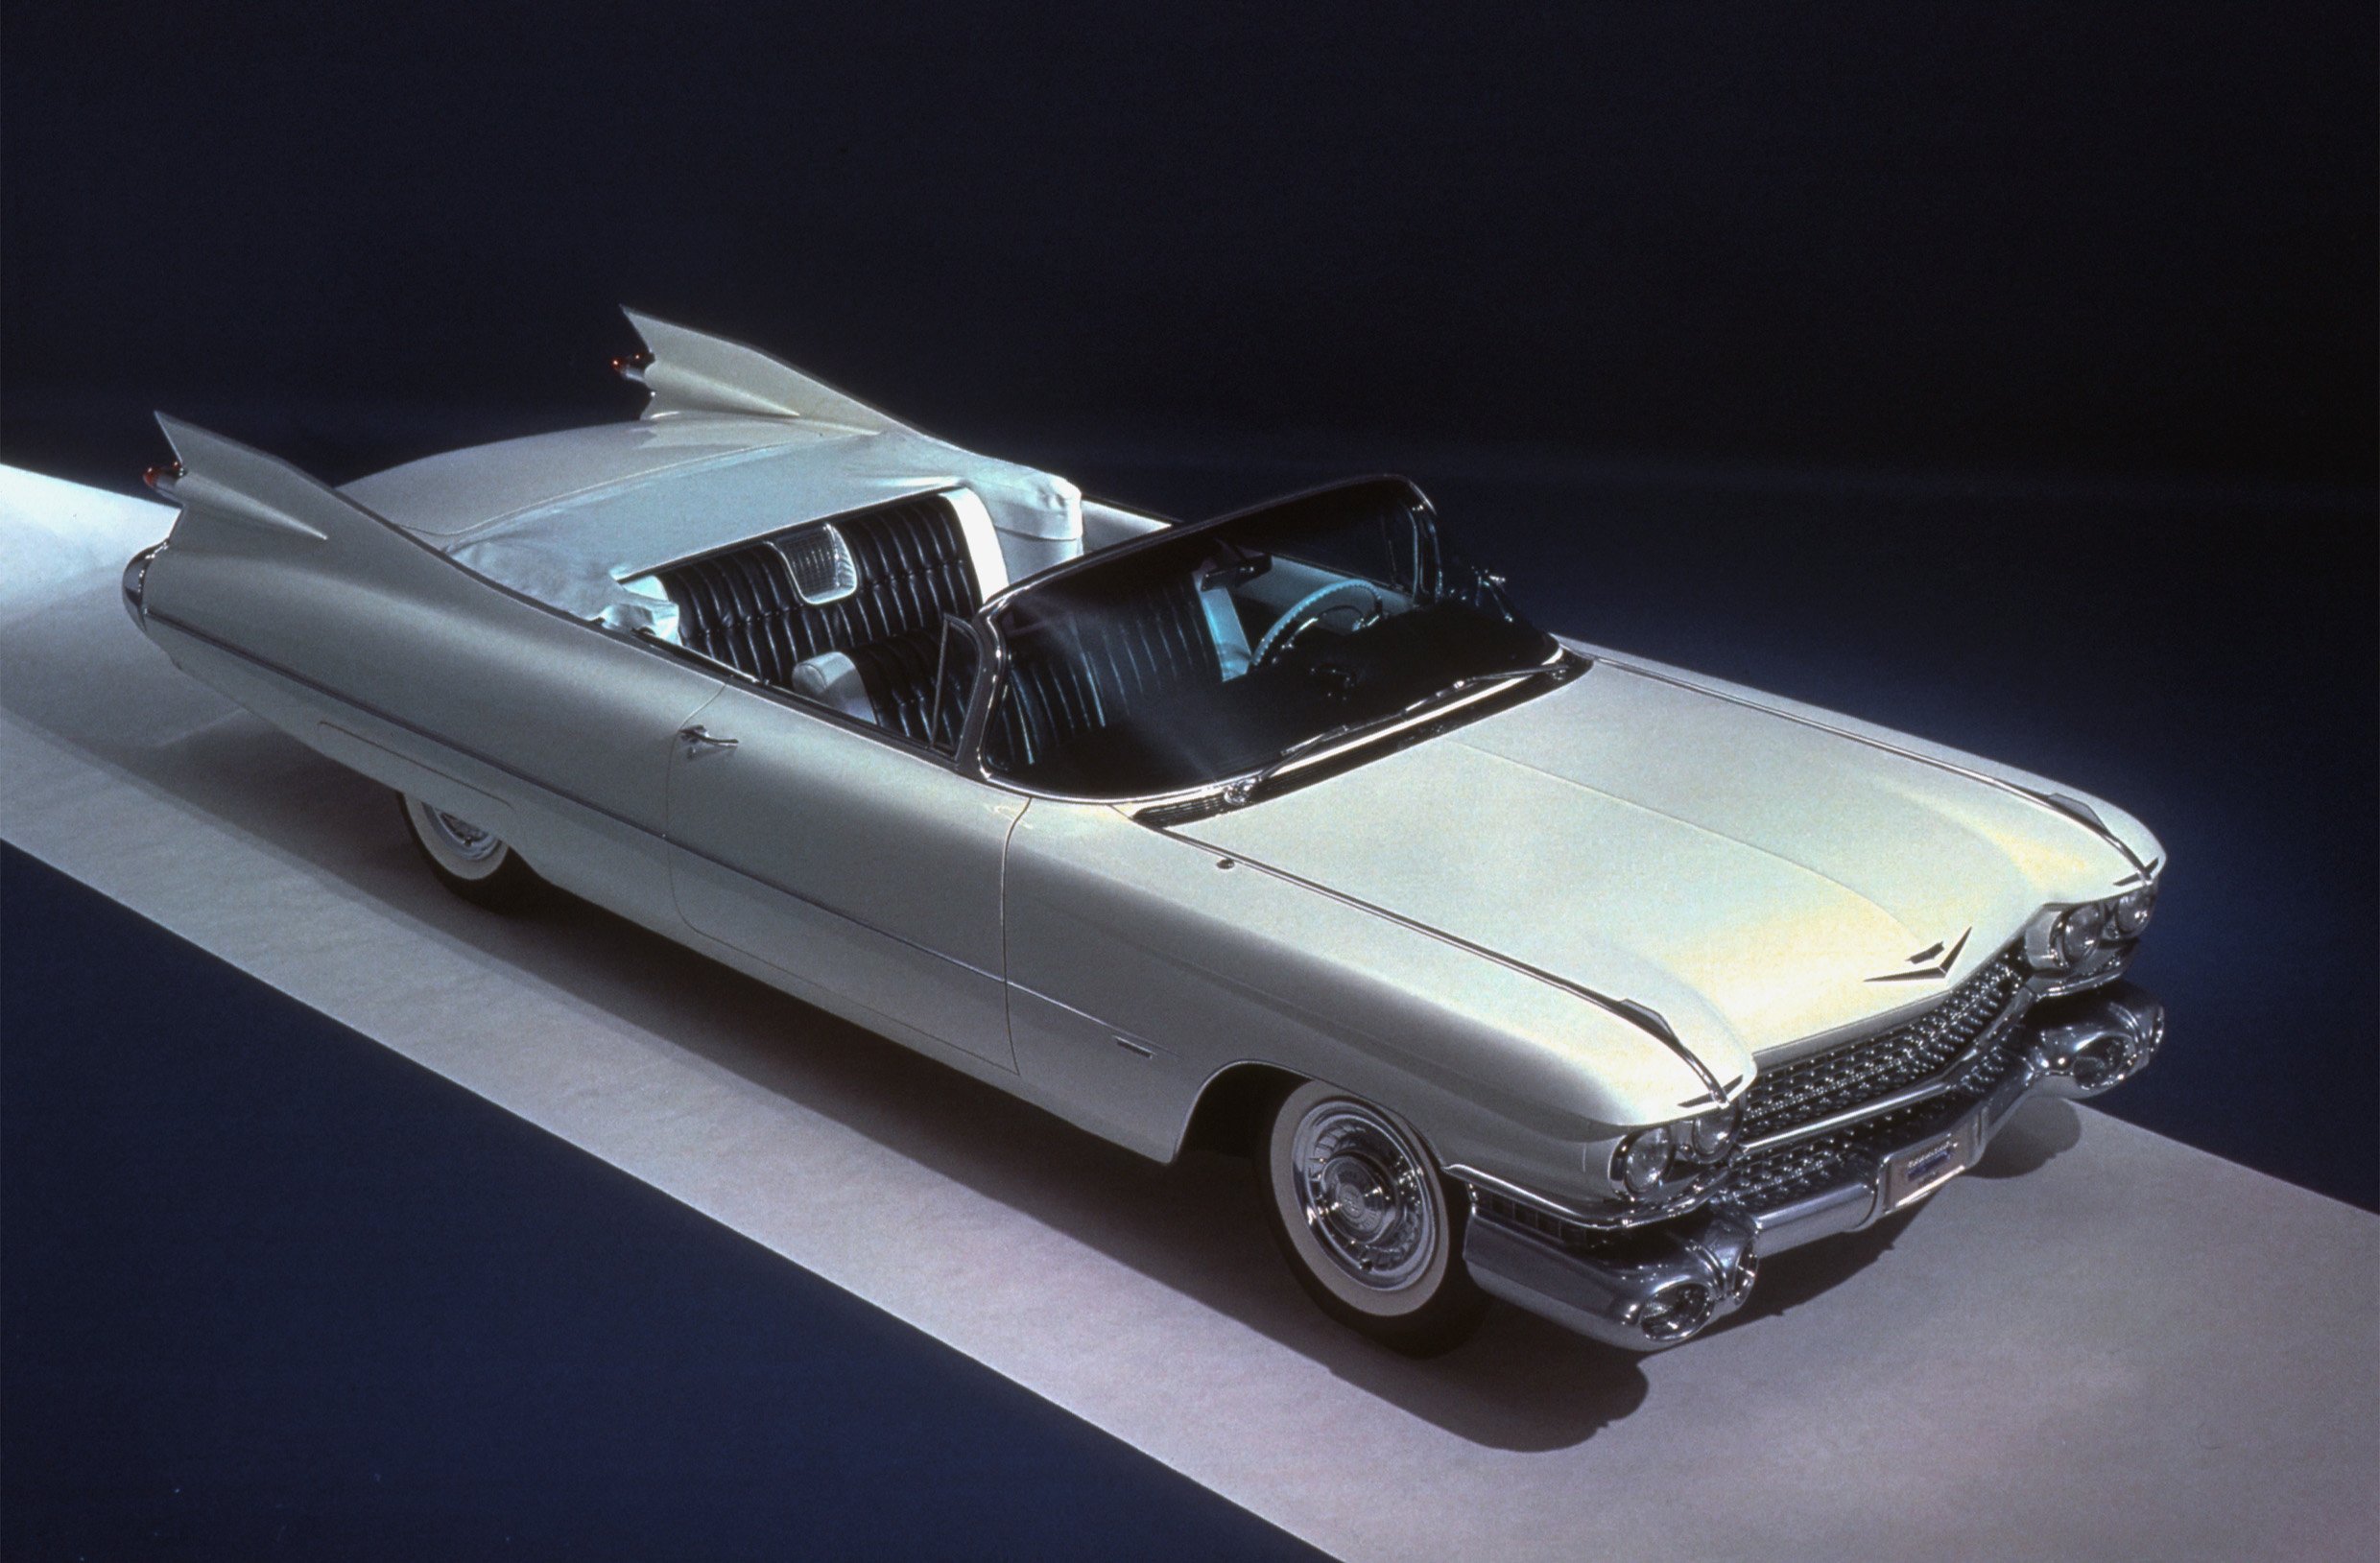 1959, Cadillac, Sixty, Two, Convertible, 6267f, Luxury, Retro, Sixty two Wallpaper